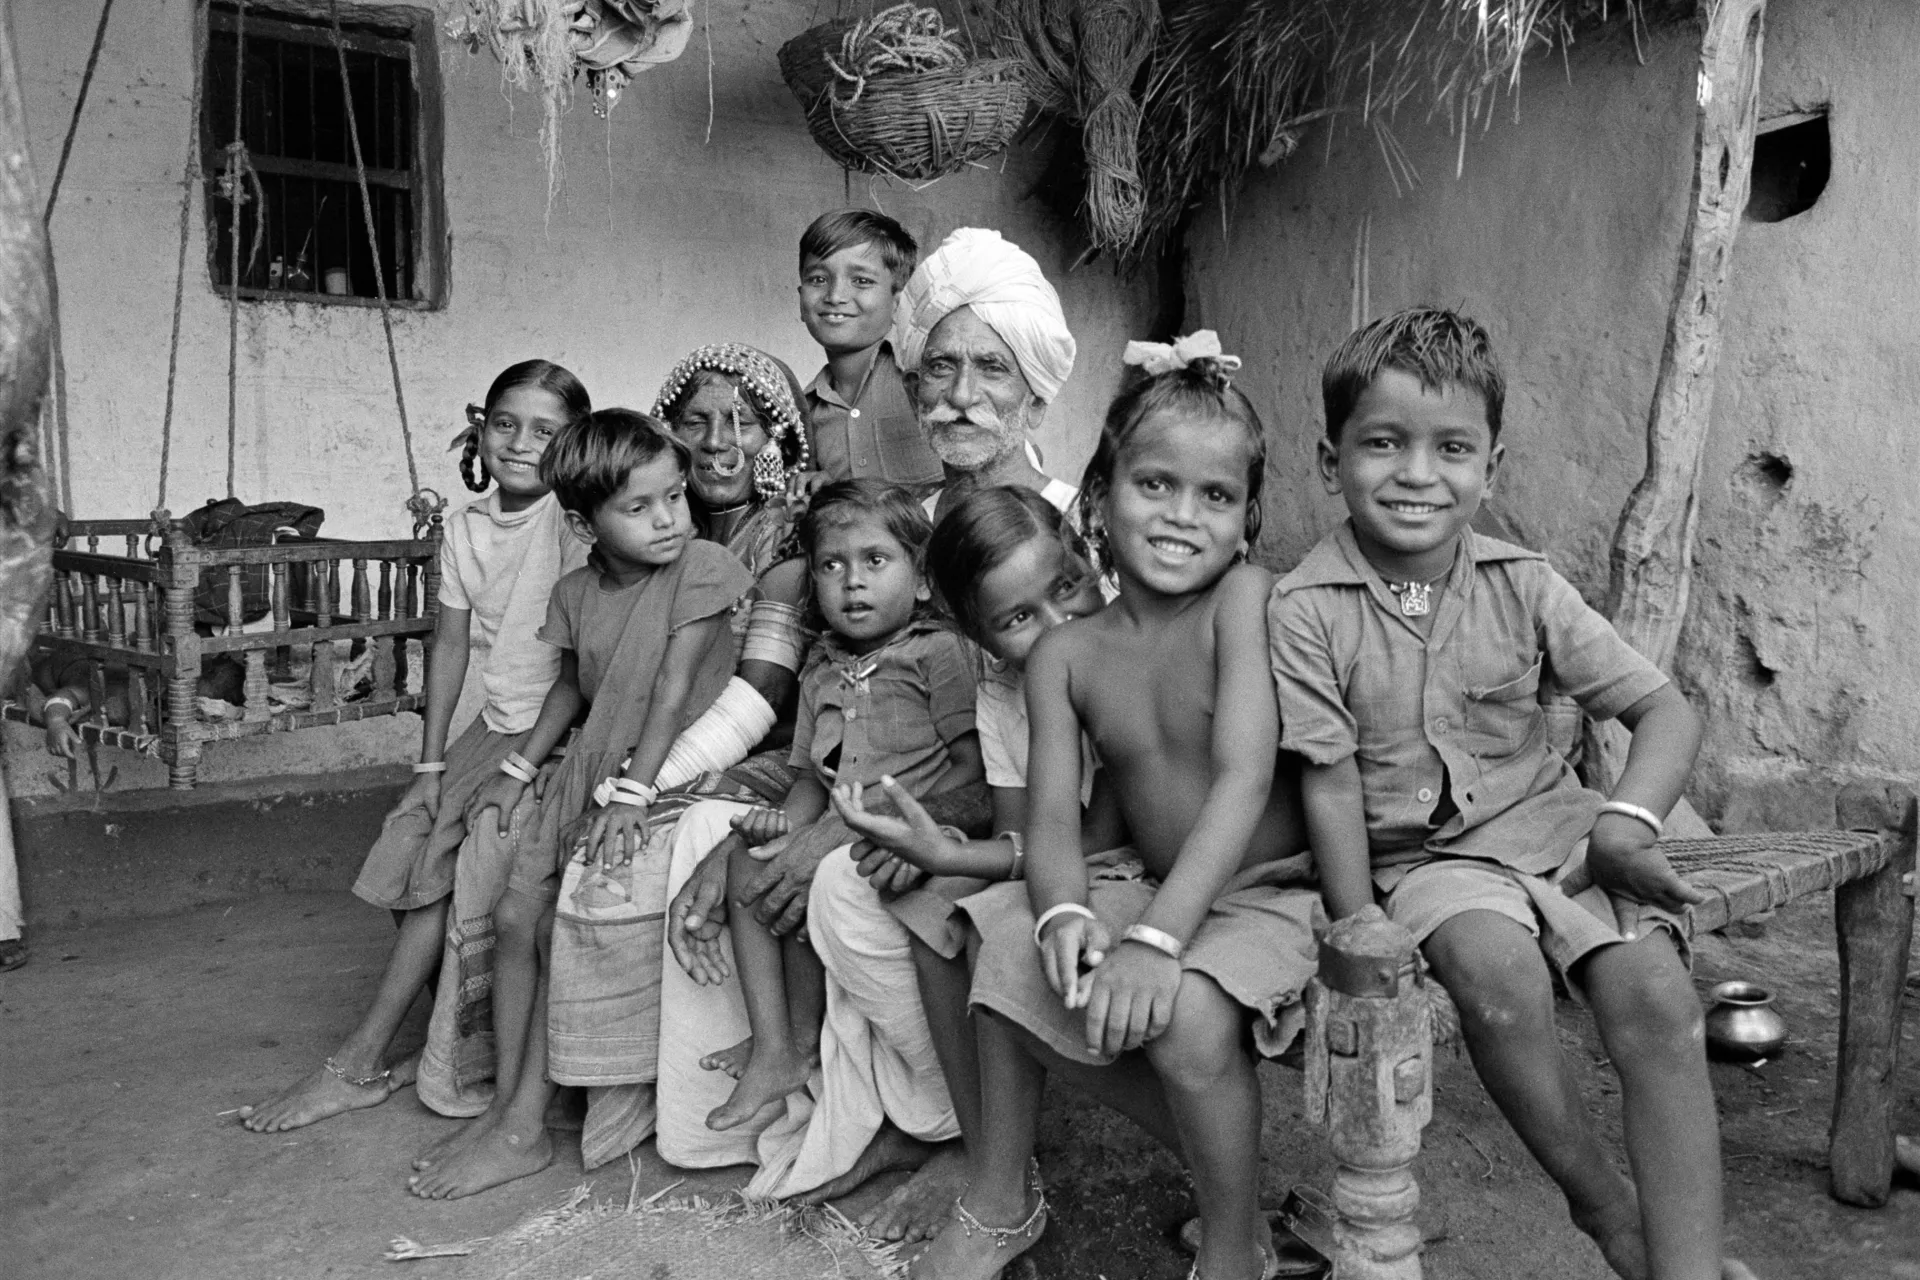 In 1985 in India, an elderly couple from the nomadic Banjari tribe sits smiling with their grandchildren in a dwelling near the south-central city of Hyderabad, capital of the state of Andhra Pradesh.